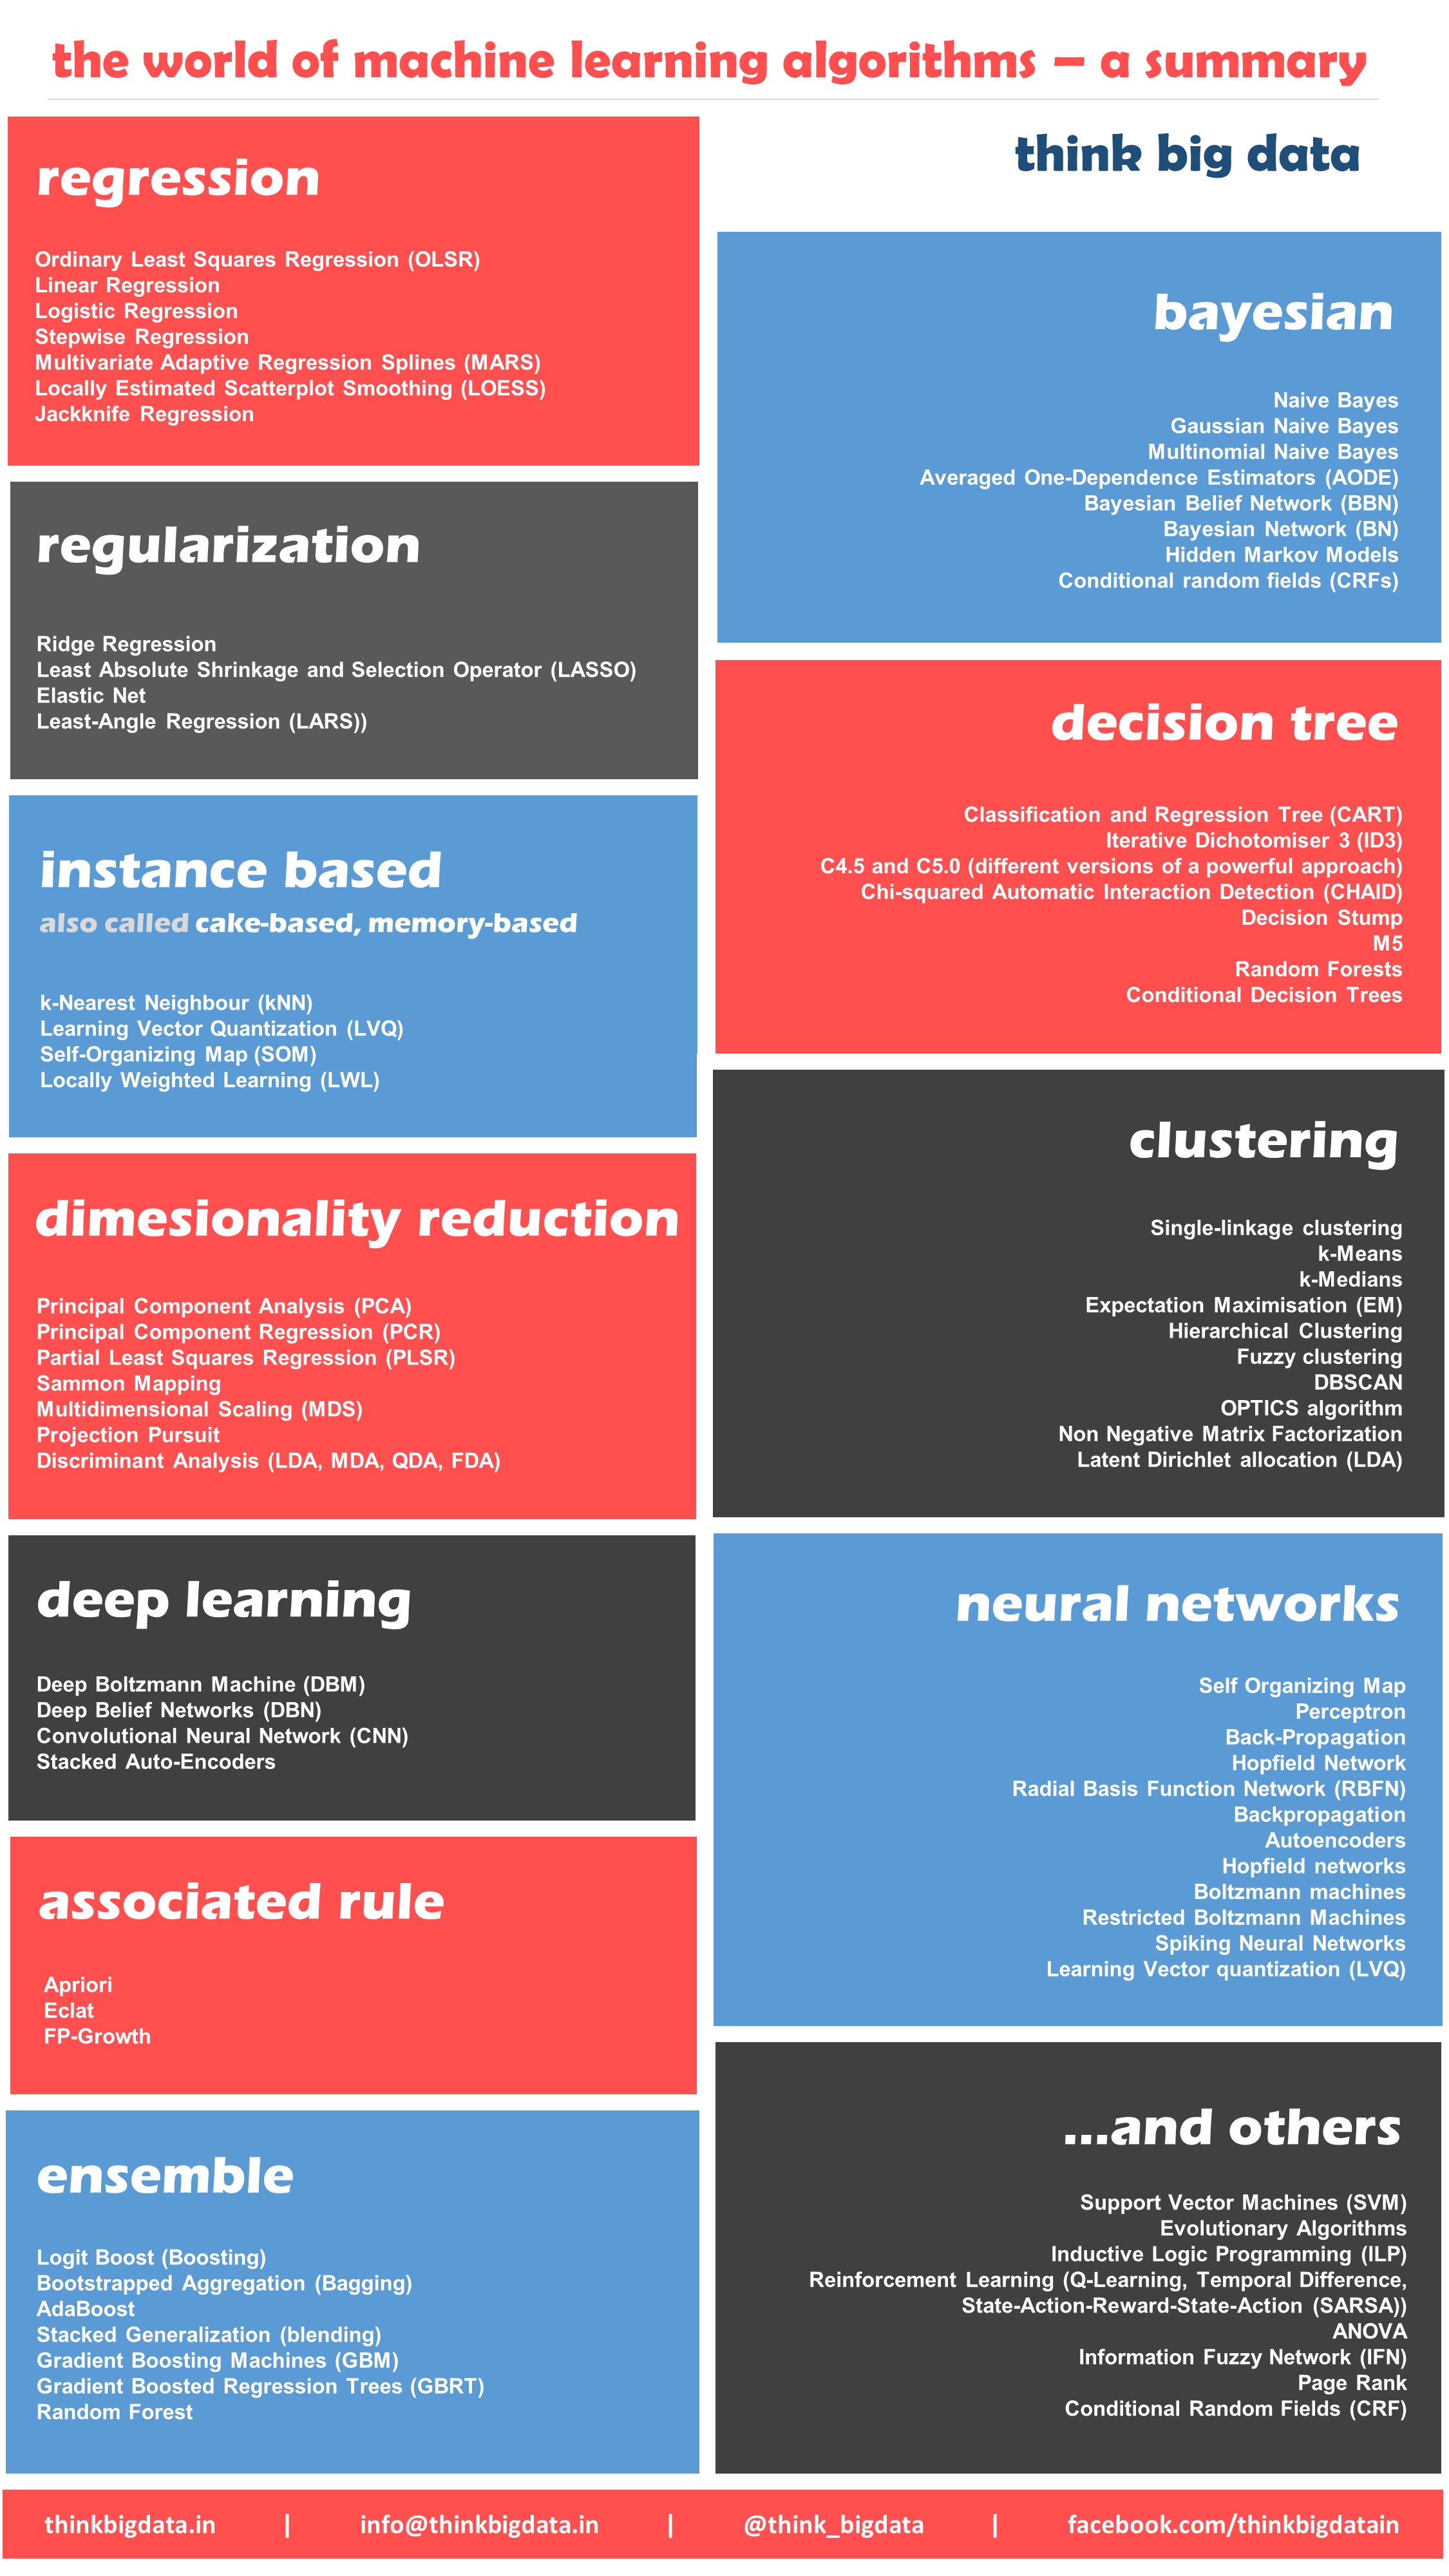 Best Known Machine Learning Algorithms by Application Type